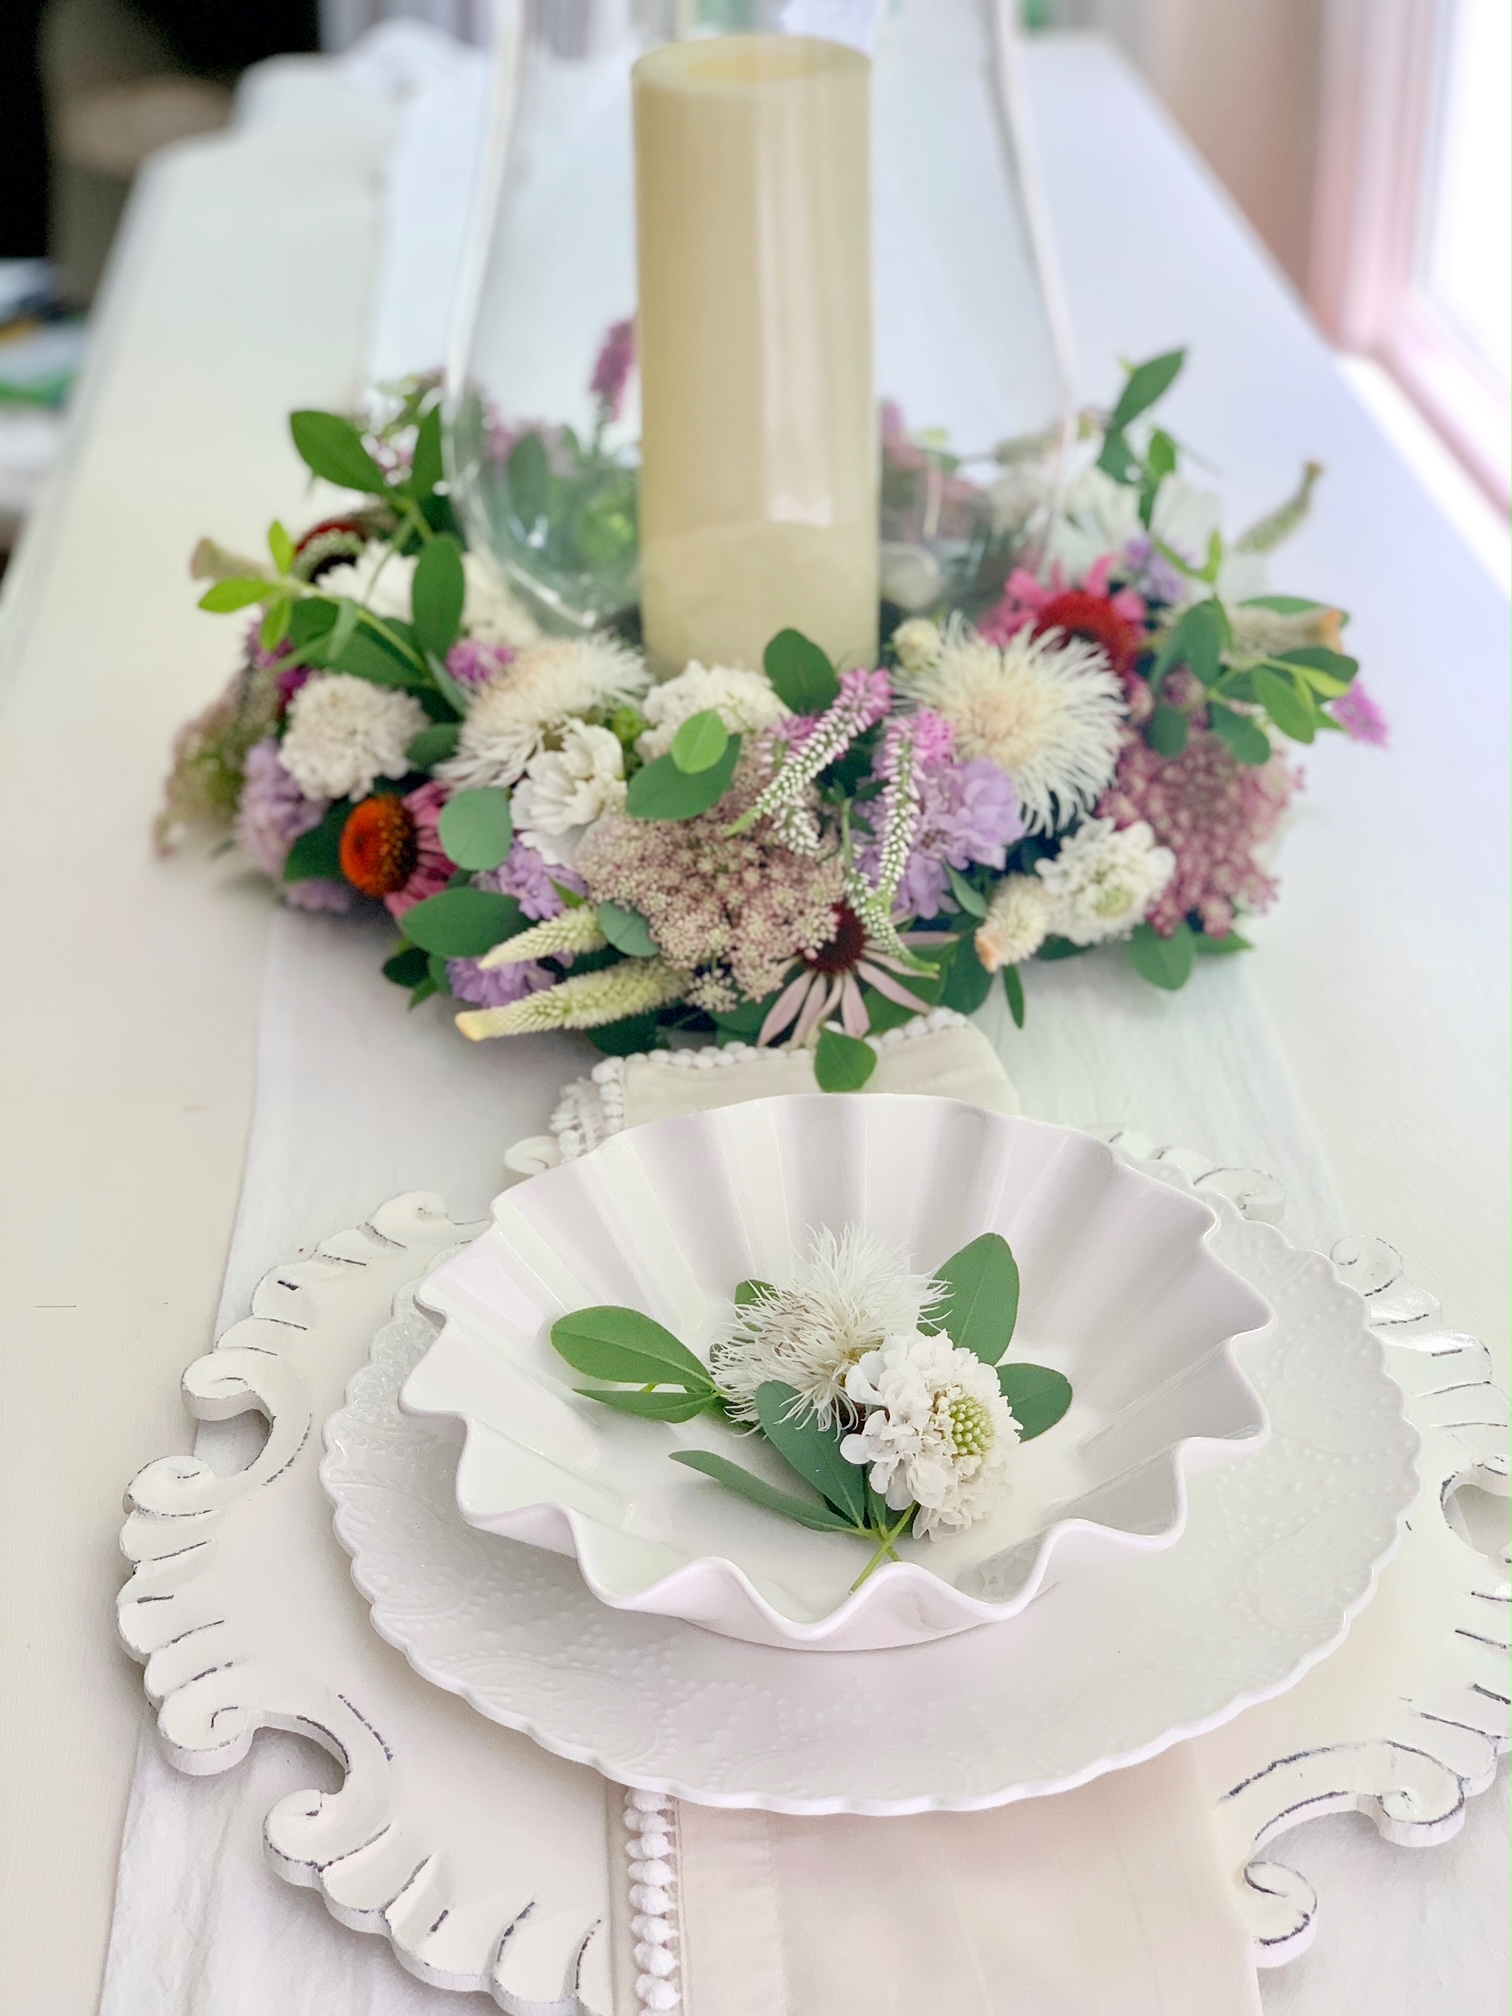 How to Make Floral Candle Rings using Fresh Flowers